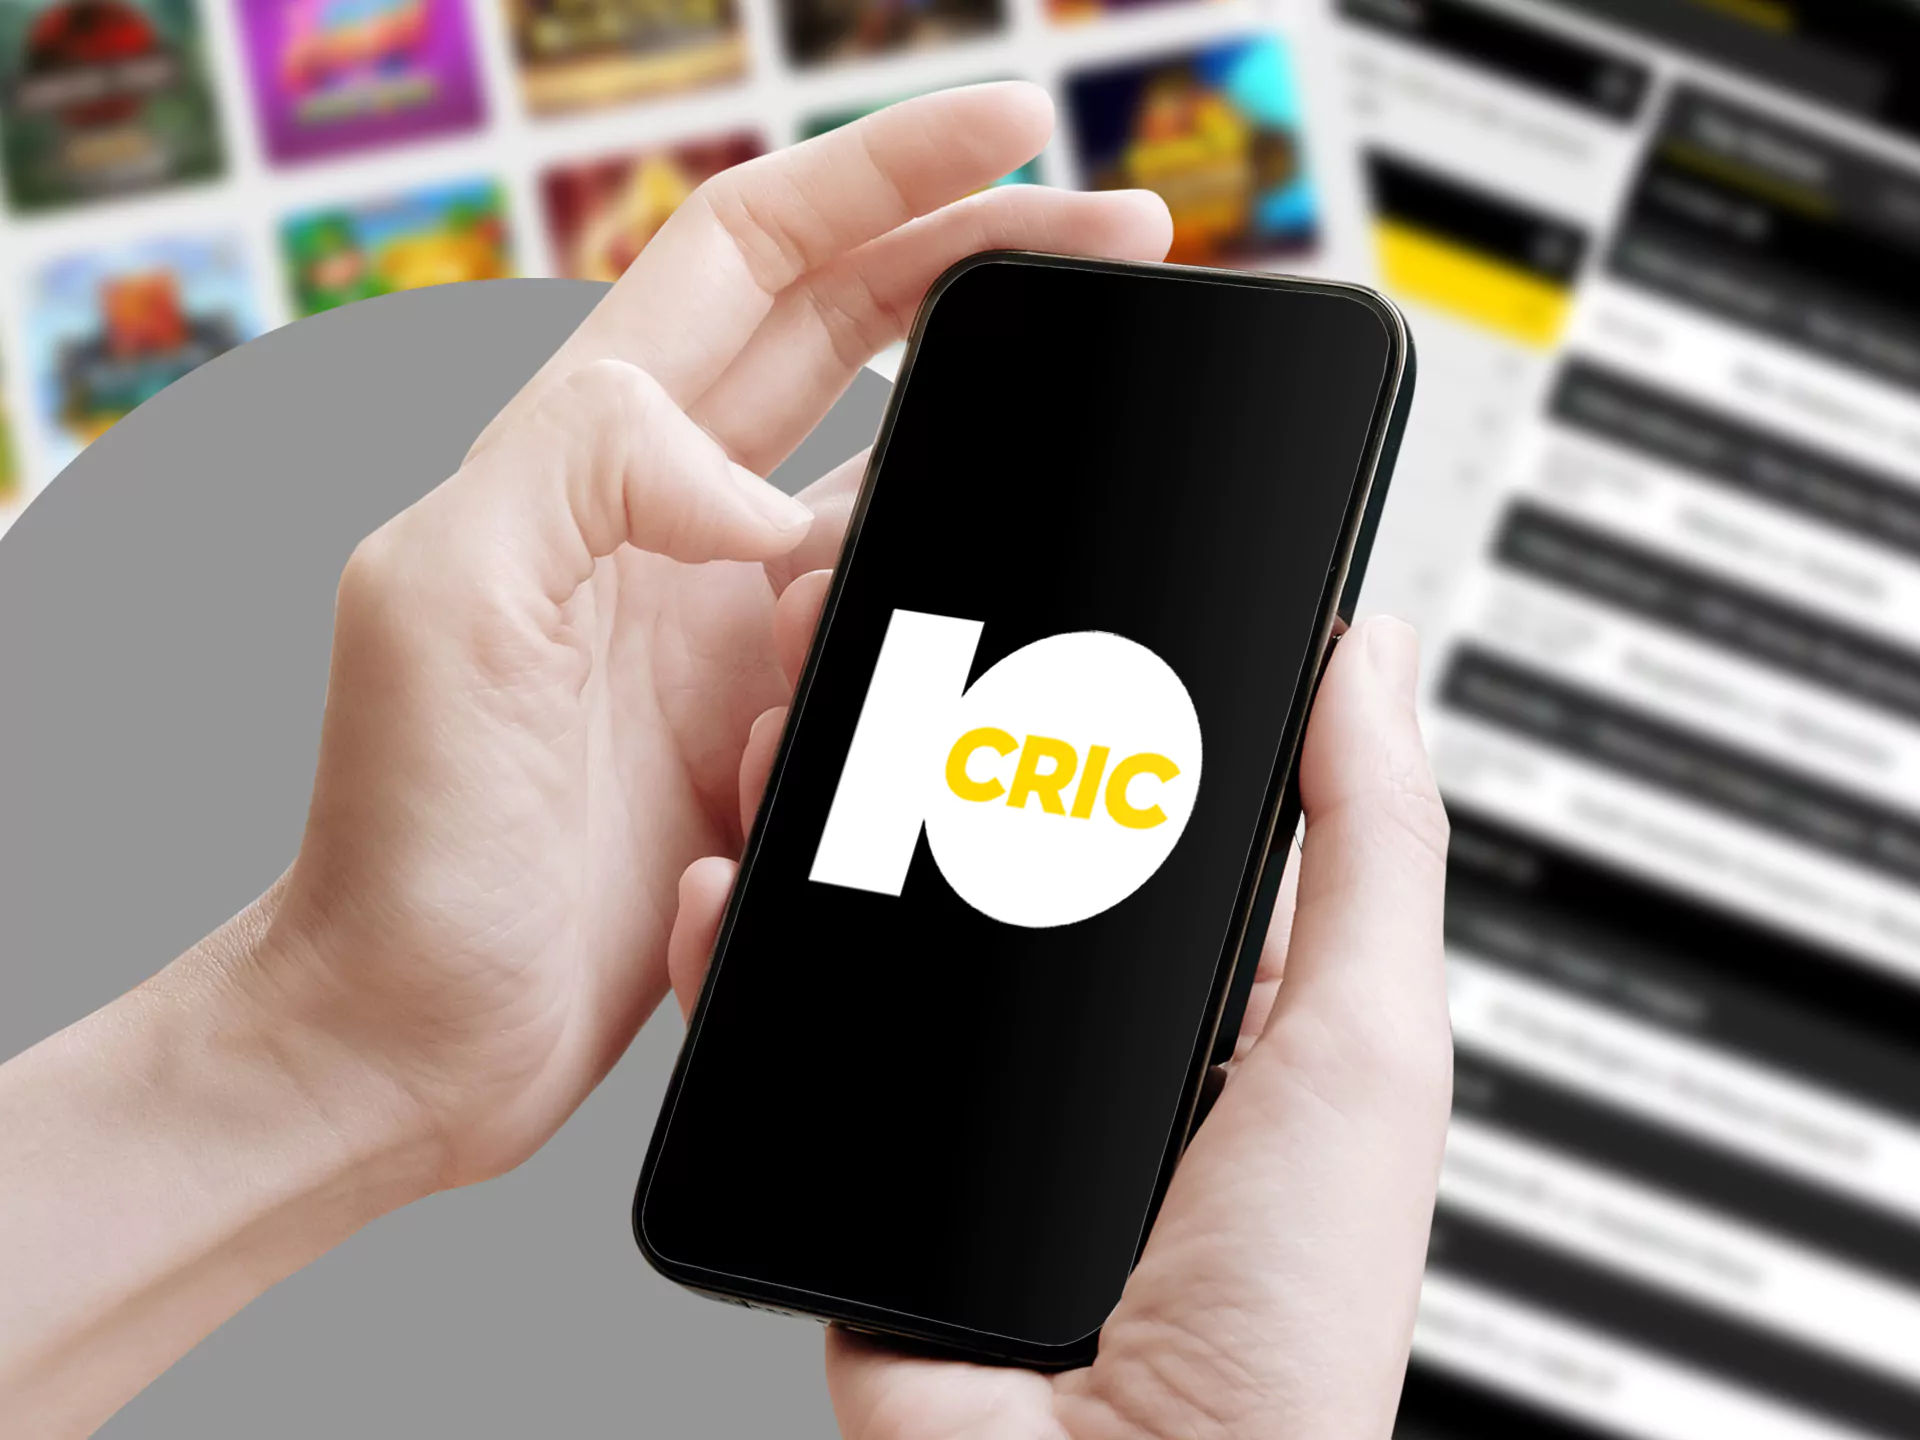 The 10Cric app has a number of advantages for sports betting.